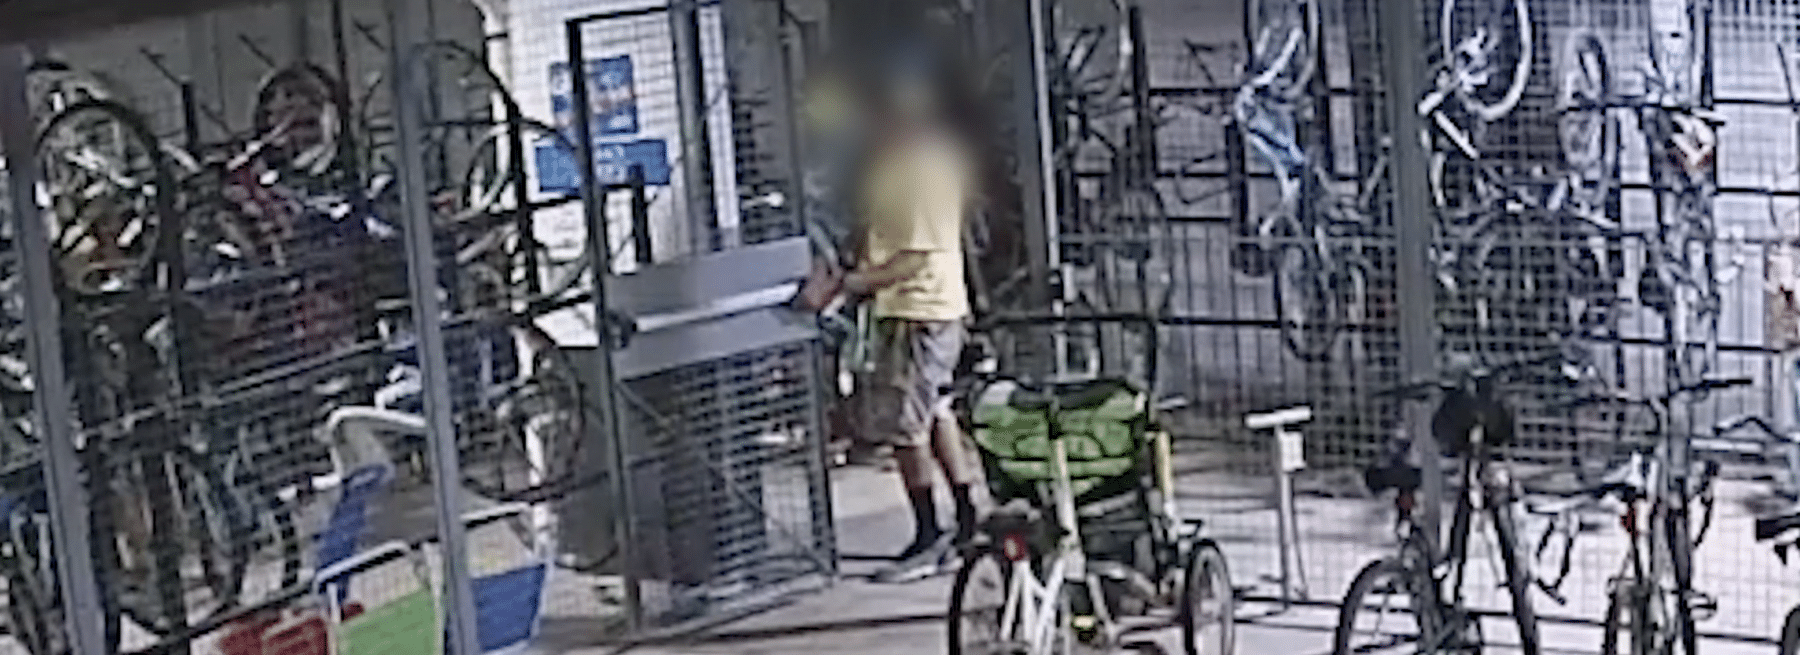 New Jersey Bike Thief Arrested